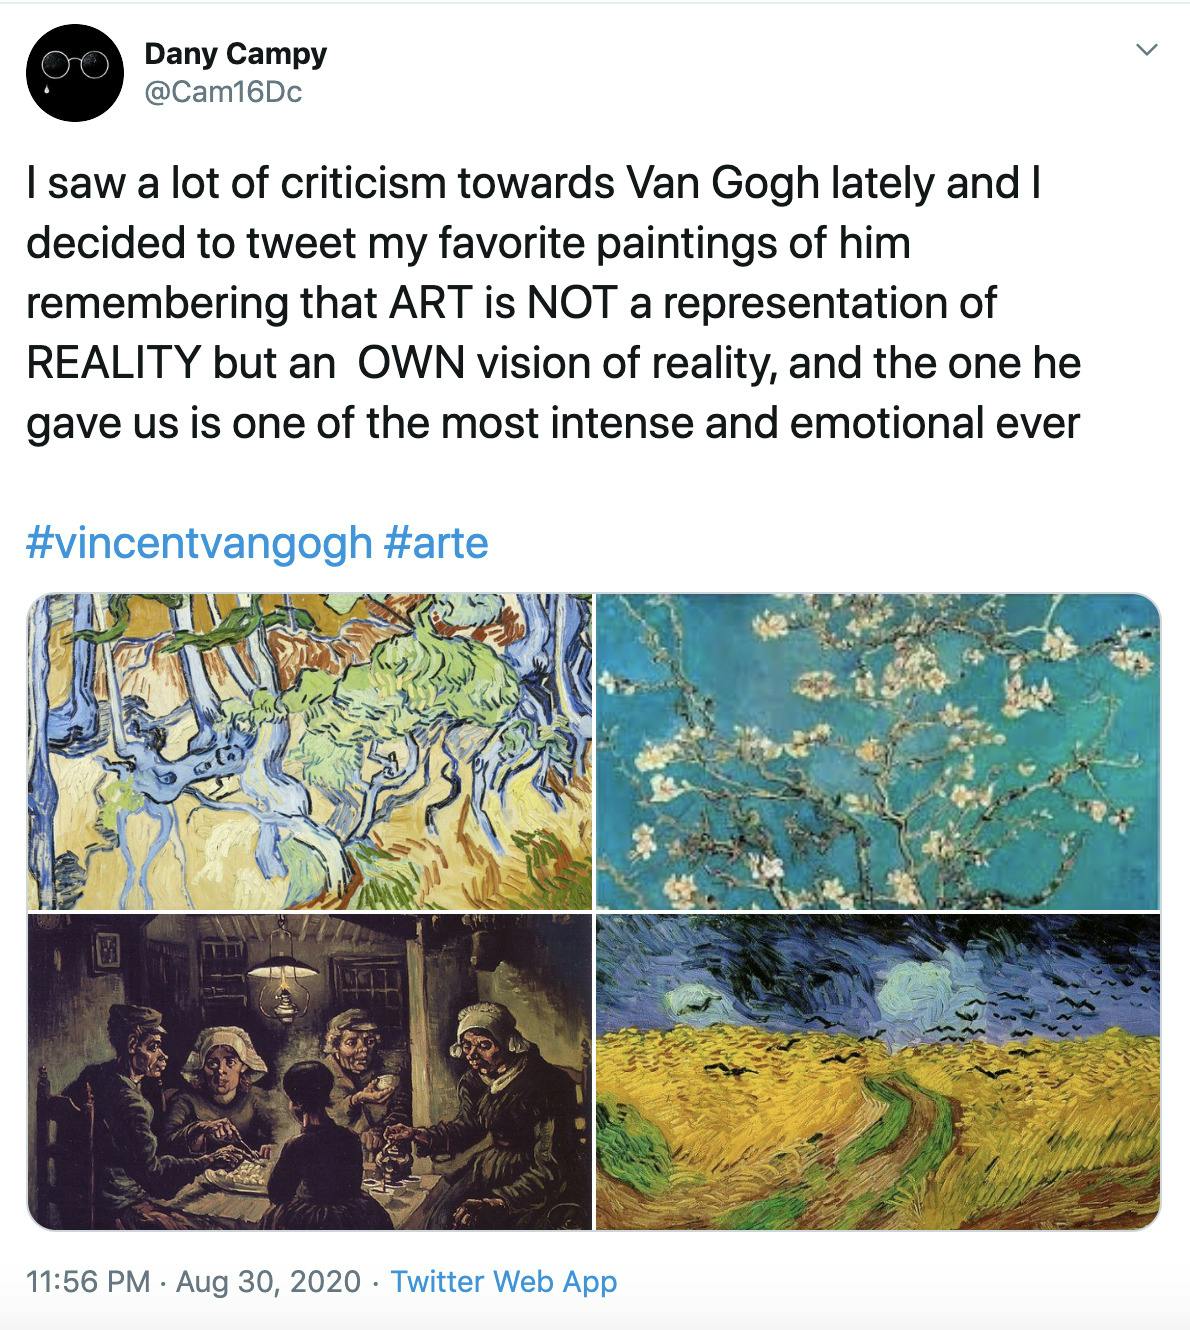 "I saw a lot of criticism towards Van Gogh lately and I decided to tweet my favorite paintings of him remembering that ART is NOT a representation of REALITY but an  OWN vision of reality, and the one he gave us is one of the most intense and emotional ever  #vincentvangogh #arte" images of Van Gogh's Tree Roots, impressionistic curving tree roots in warm colours, Almond Blossoms, a painting of white blossoms set against bright medium blue, The Potato Eaters, a darkly coloured image of people eating potatoes in traditional Dutch clothing and  Wheatfield with Crows, a painting of a wheat field under a dark blue sky with crows in flight